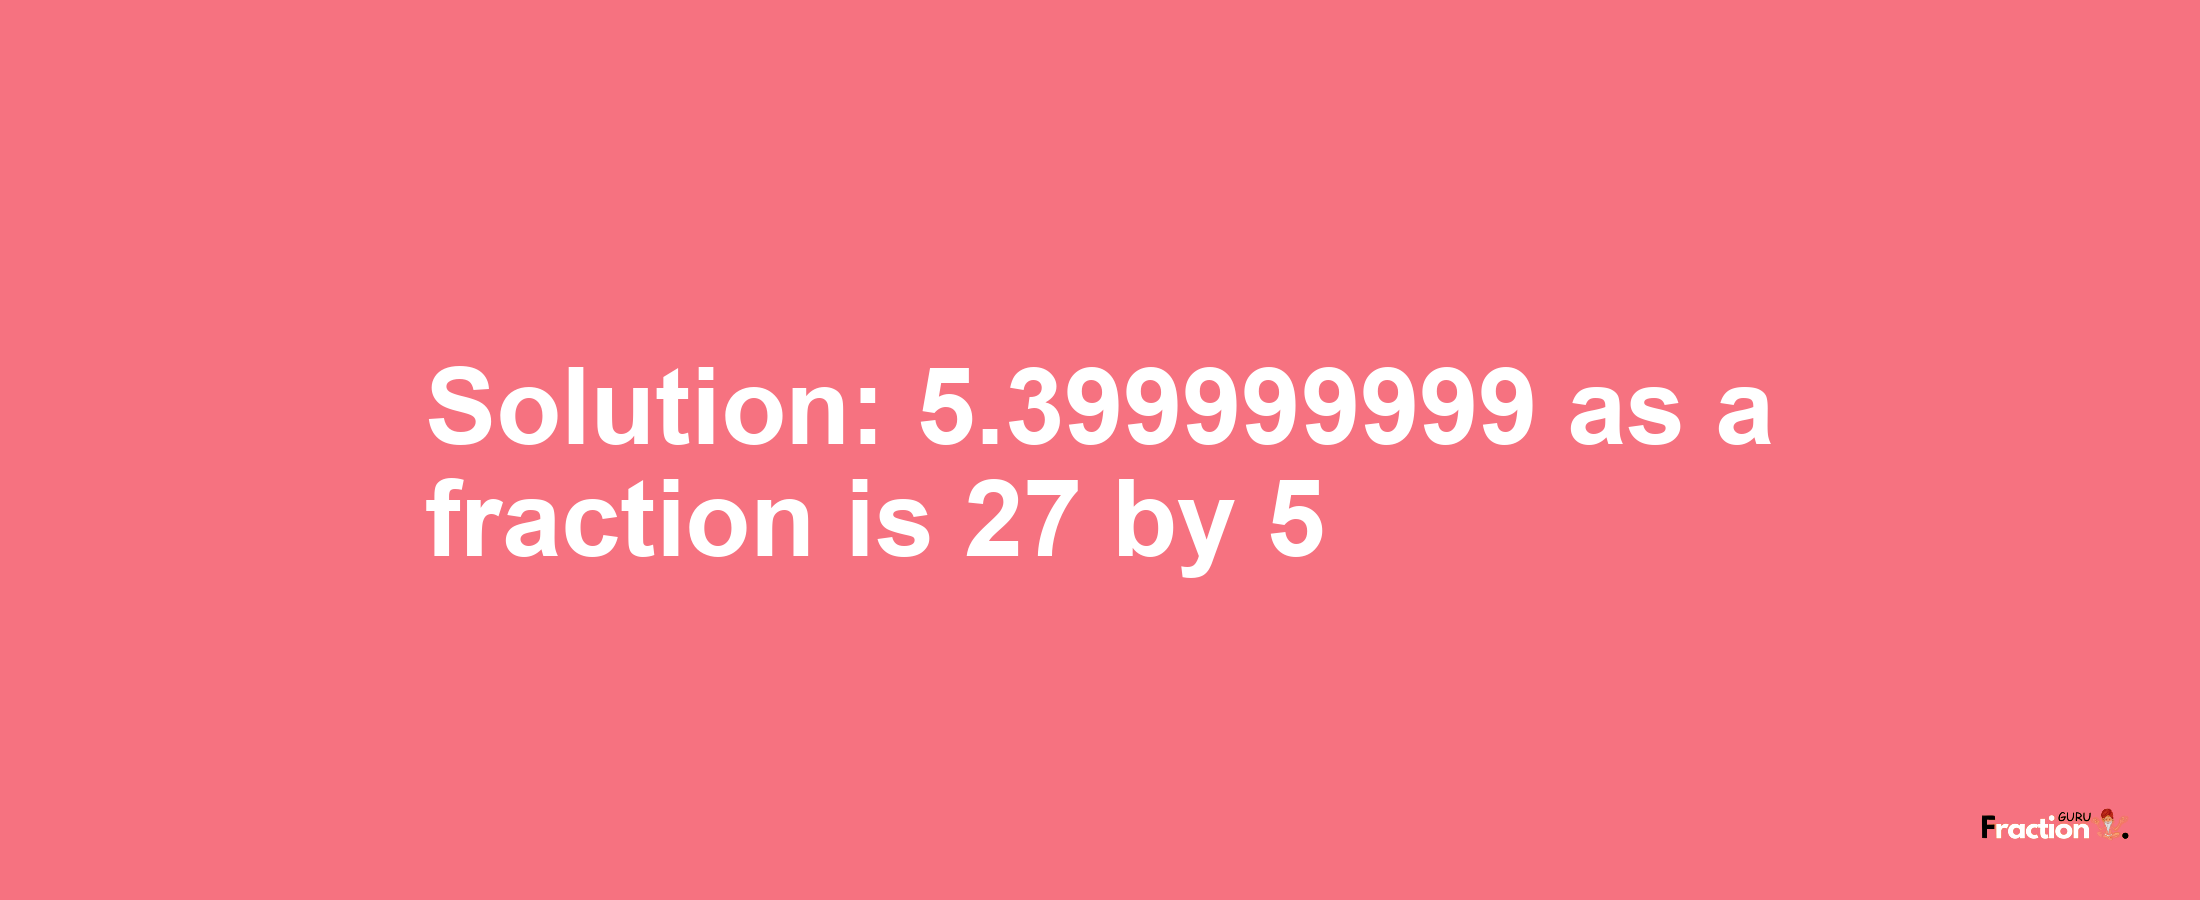 Solution:5.399999999 as a fraction is 27/5